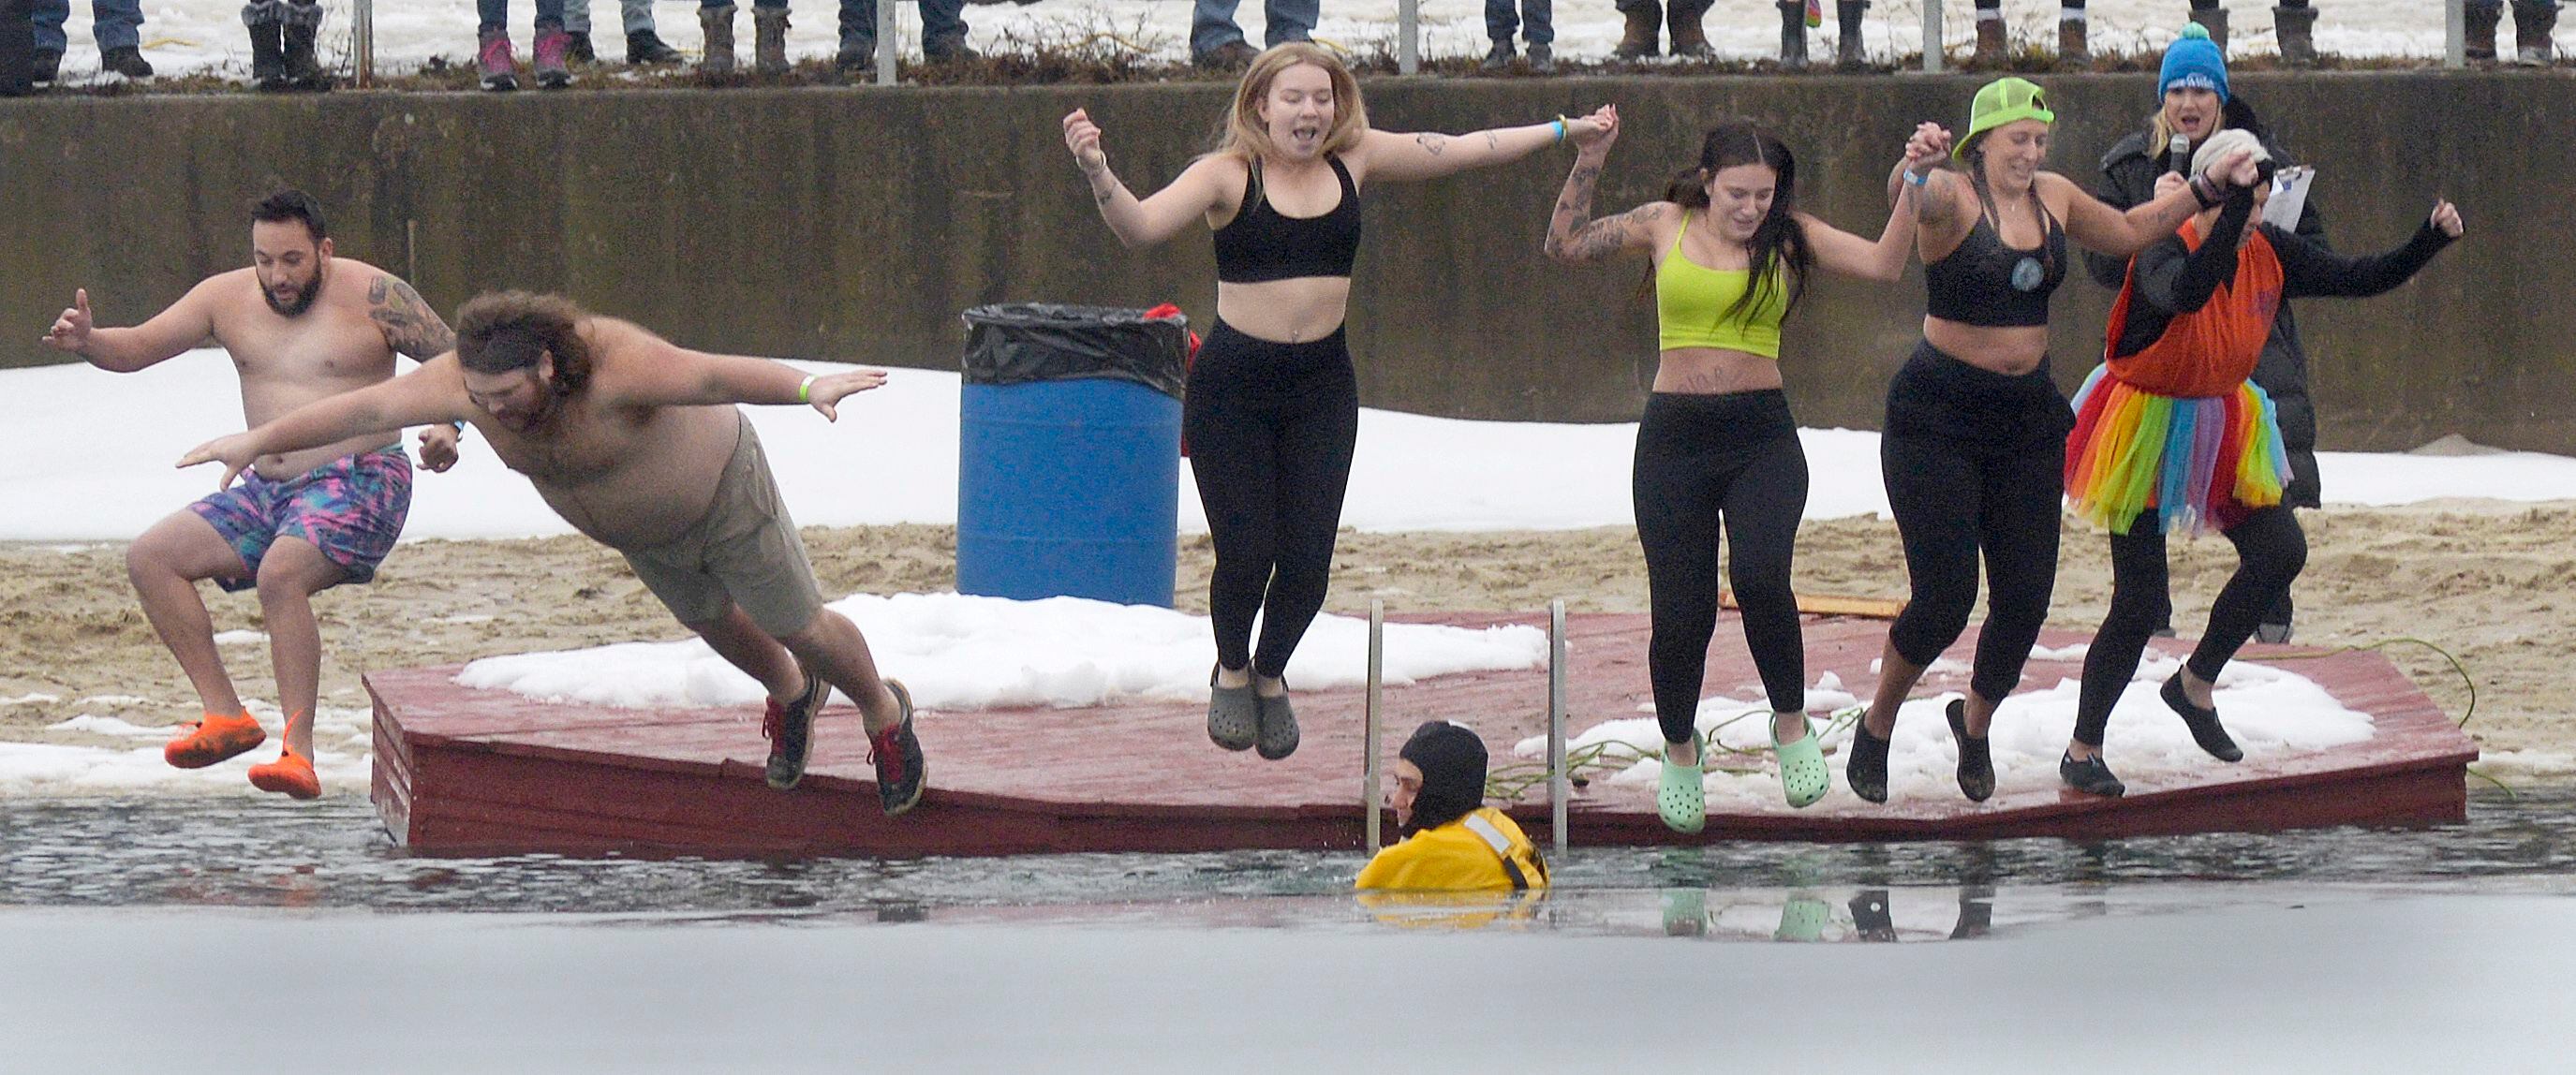 140 hardy souls take the Penguin Plunge in Ottawa – Shaw Local